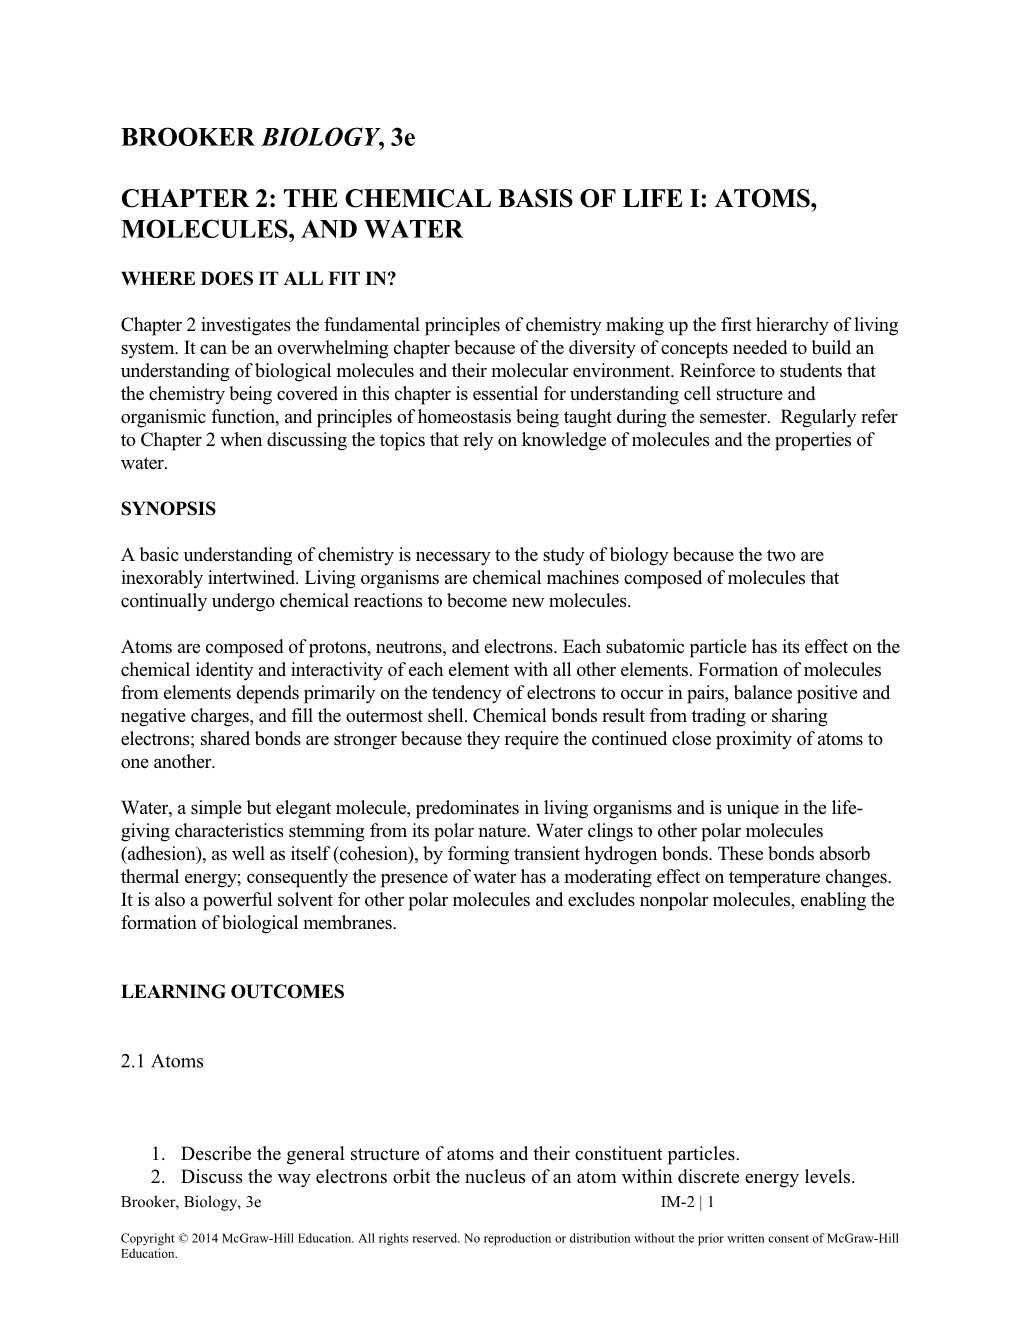 Chapter 2: the Chemical Basis of Life I: Atoms, Molecules, and Water